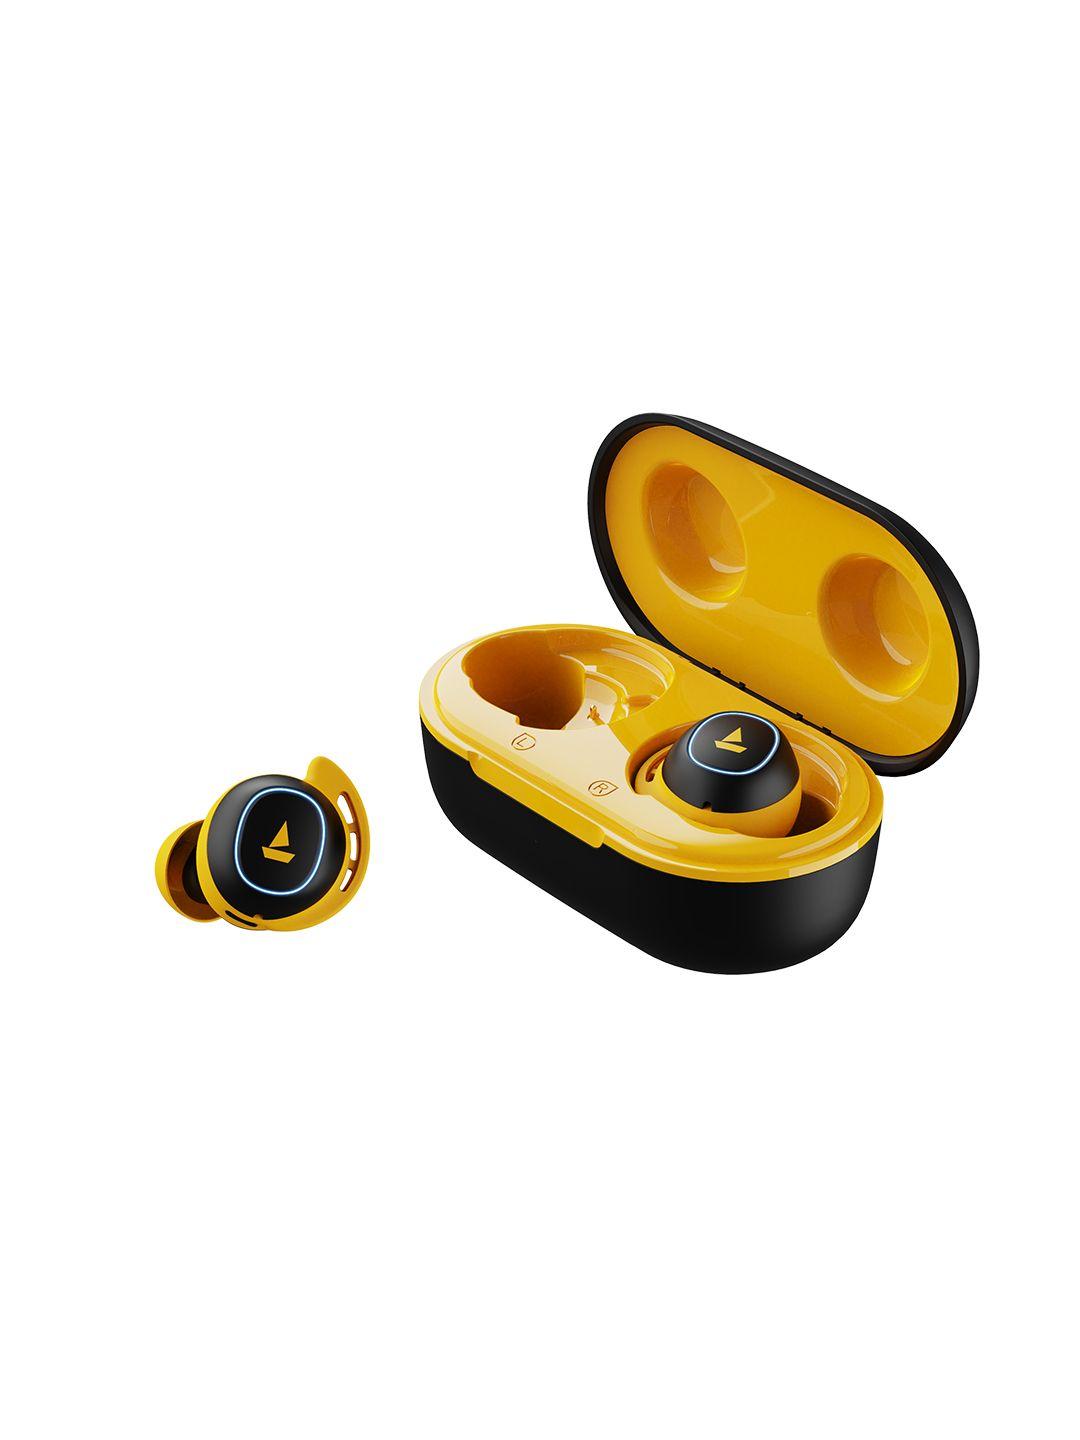 boat airdopes 441 m tws earbuds with iwp technology - bumblebee yellow